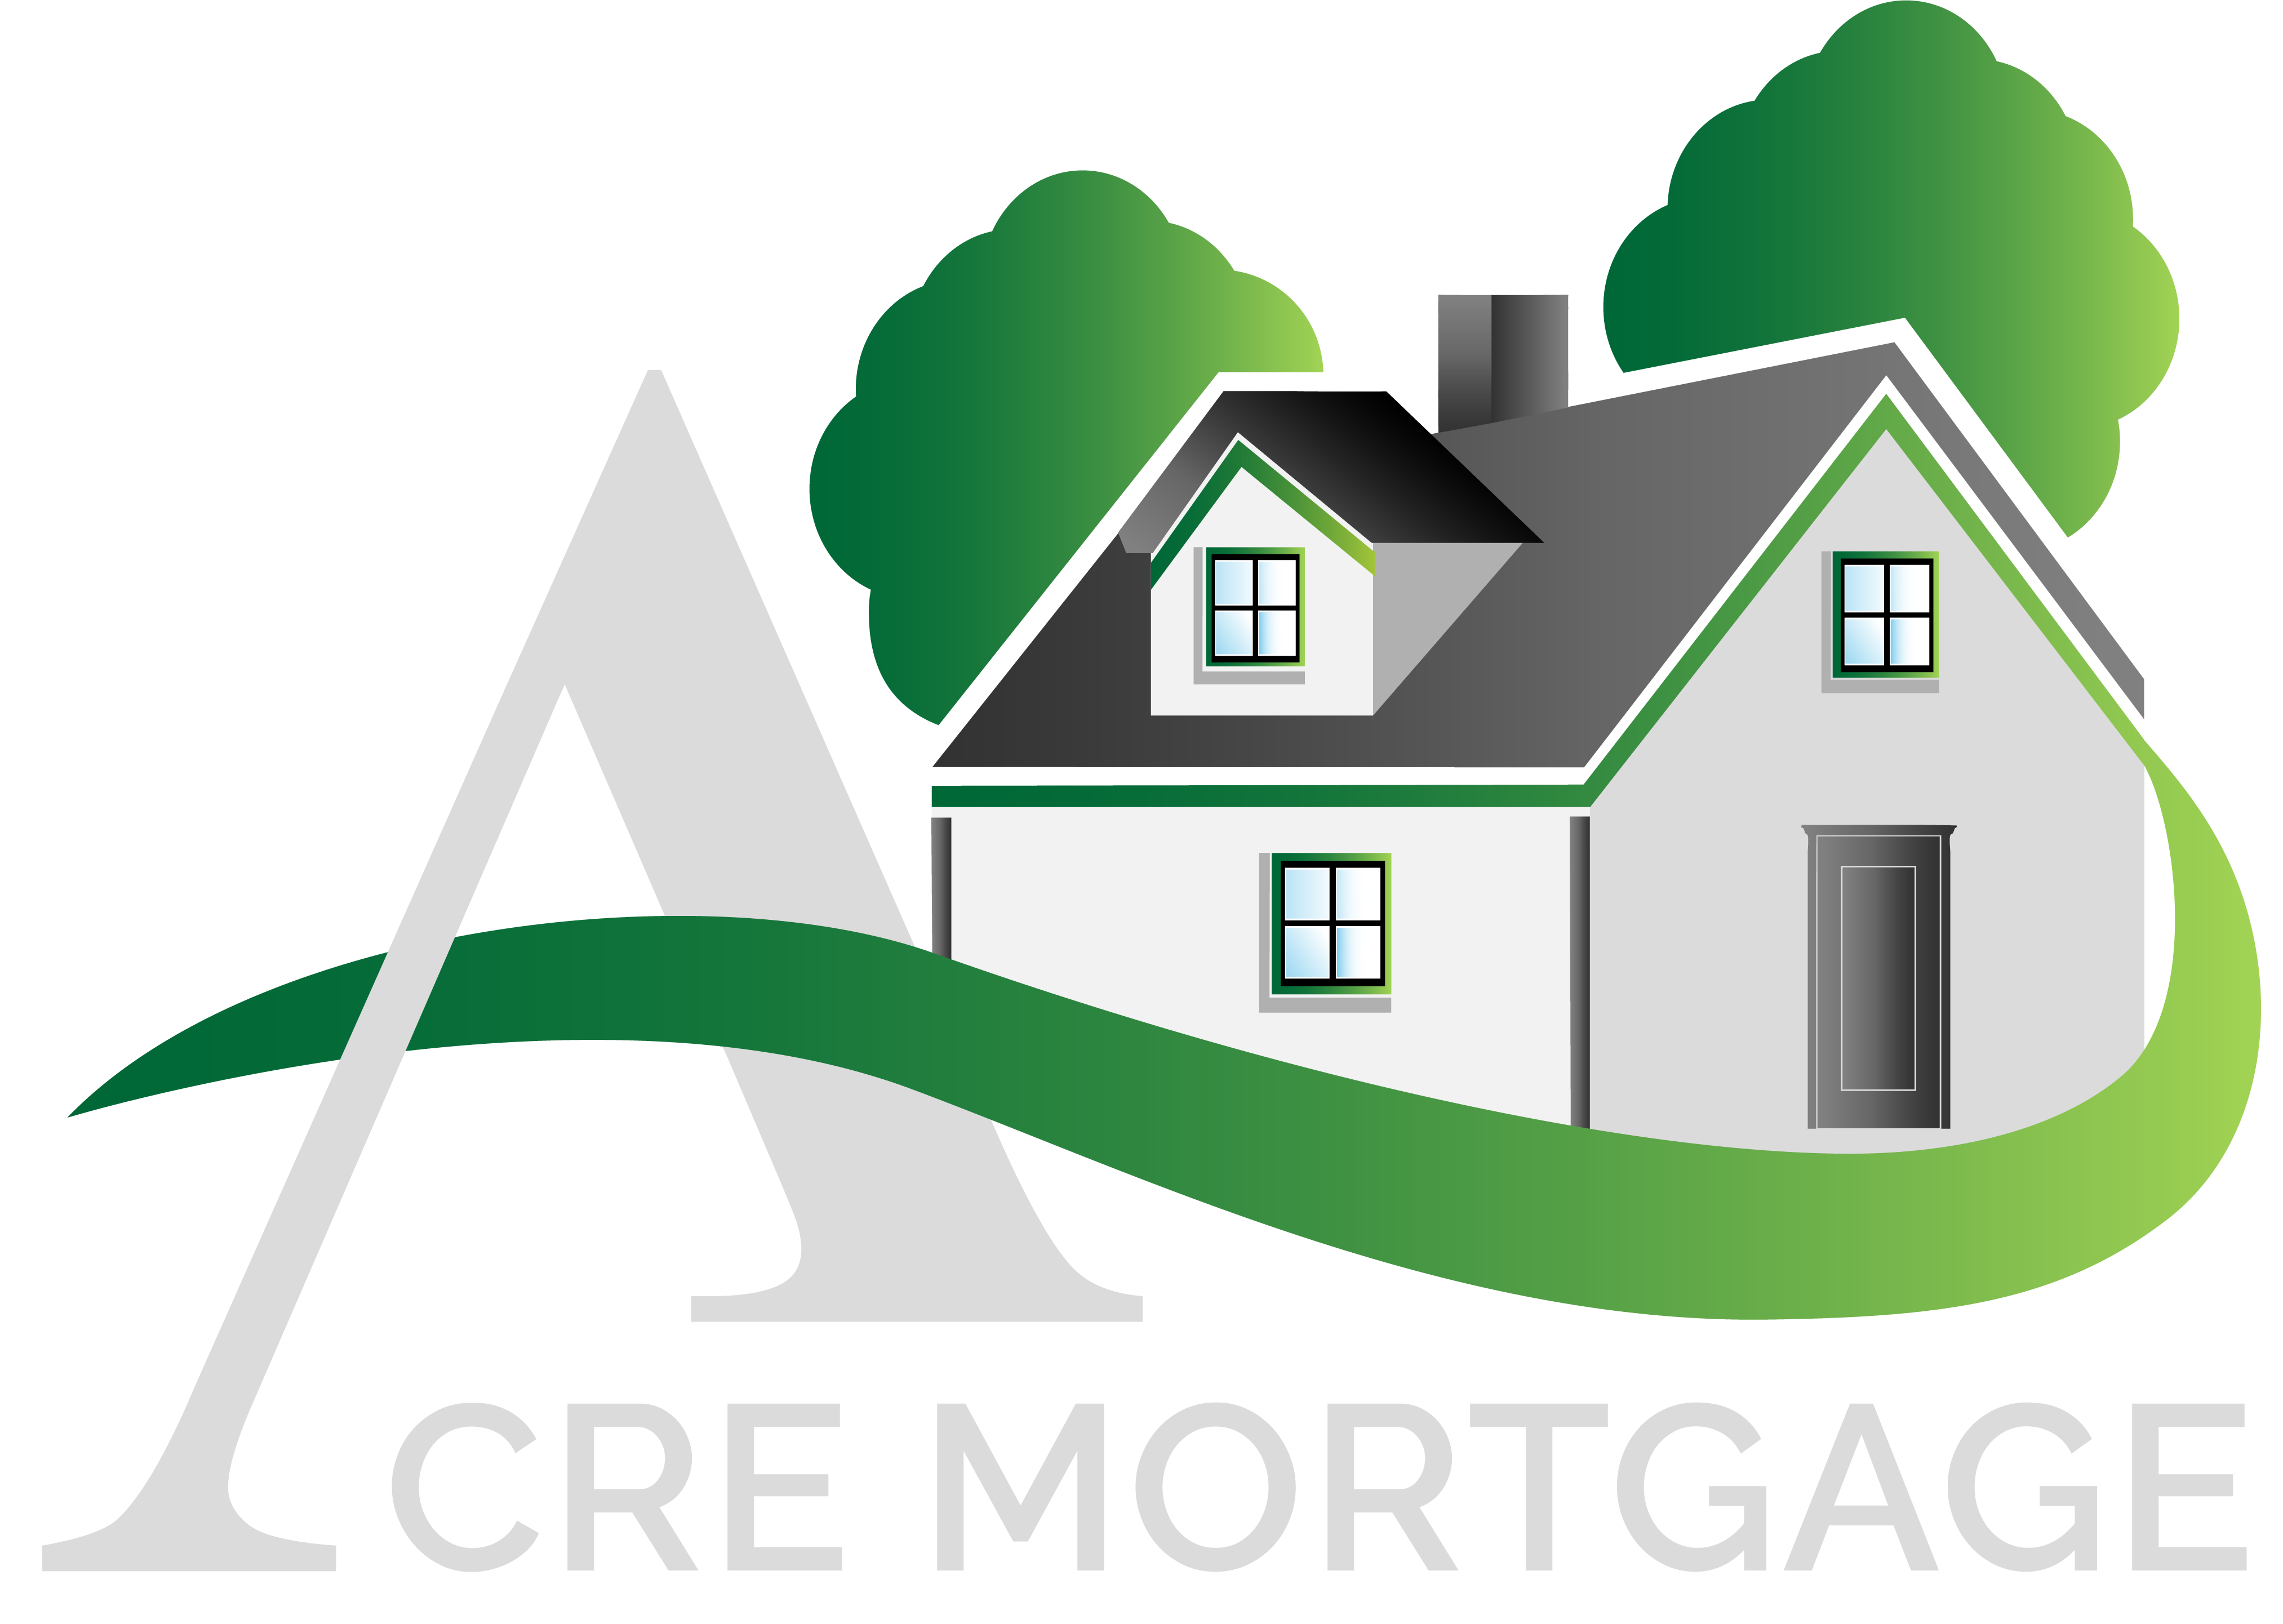 Acre Mortgage: Home